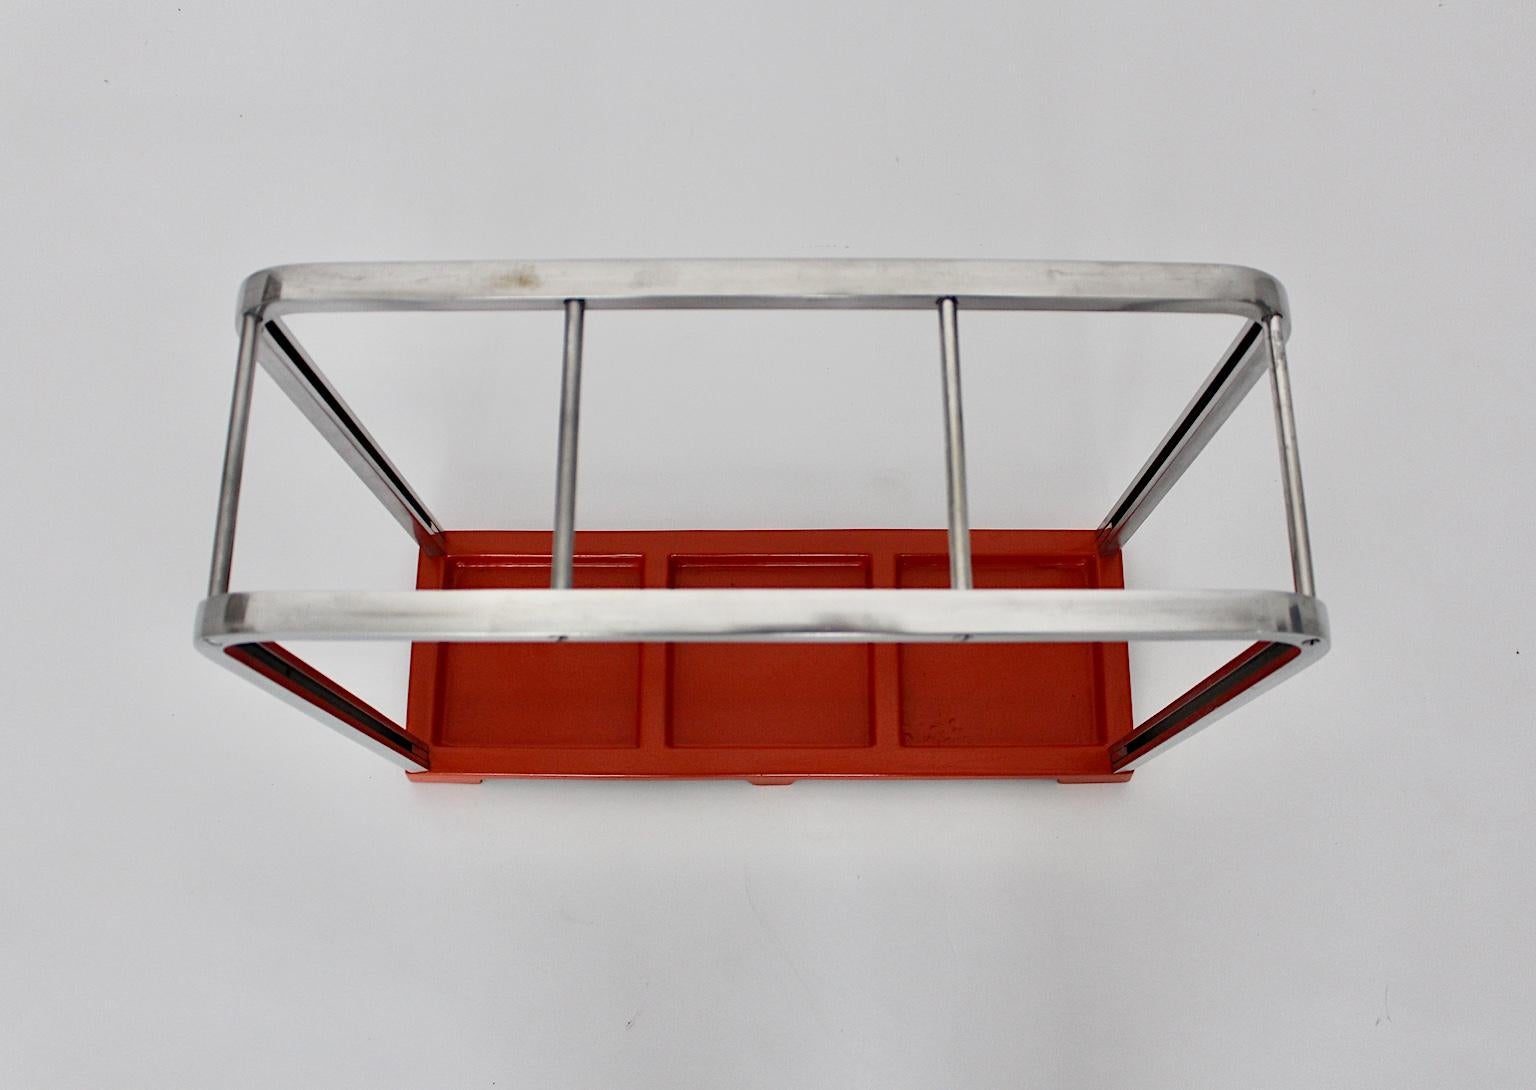 Bauhaus Art Deco Vintage Red Silver Aluminum Umbrella Stand, 1930s, Germany For Sale 2